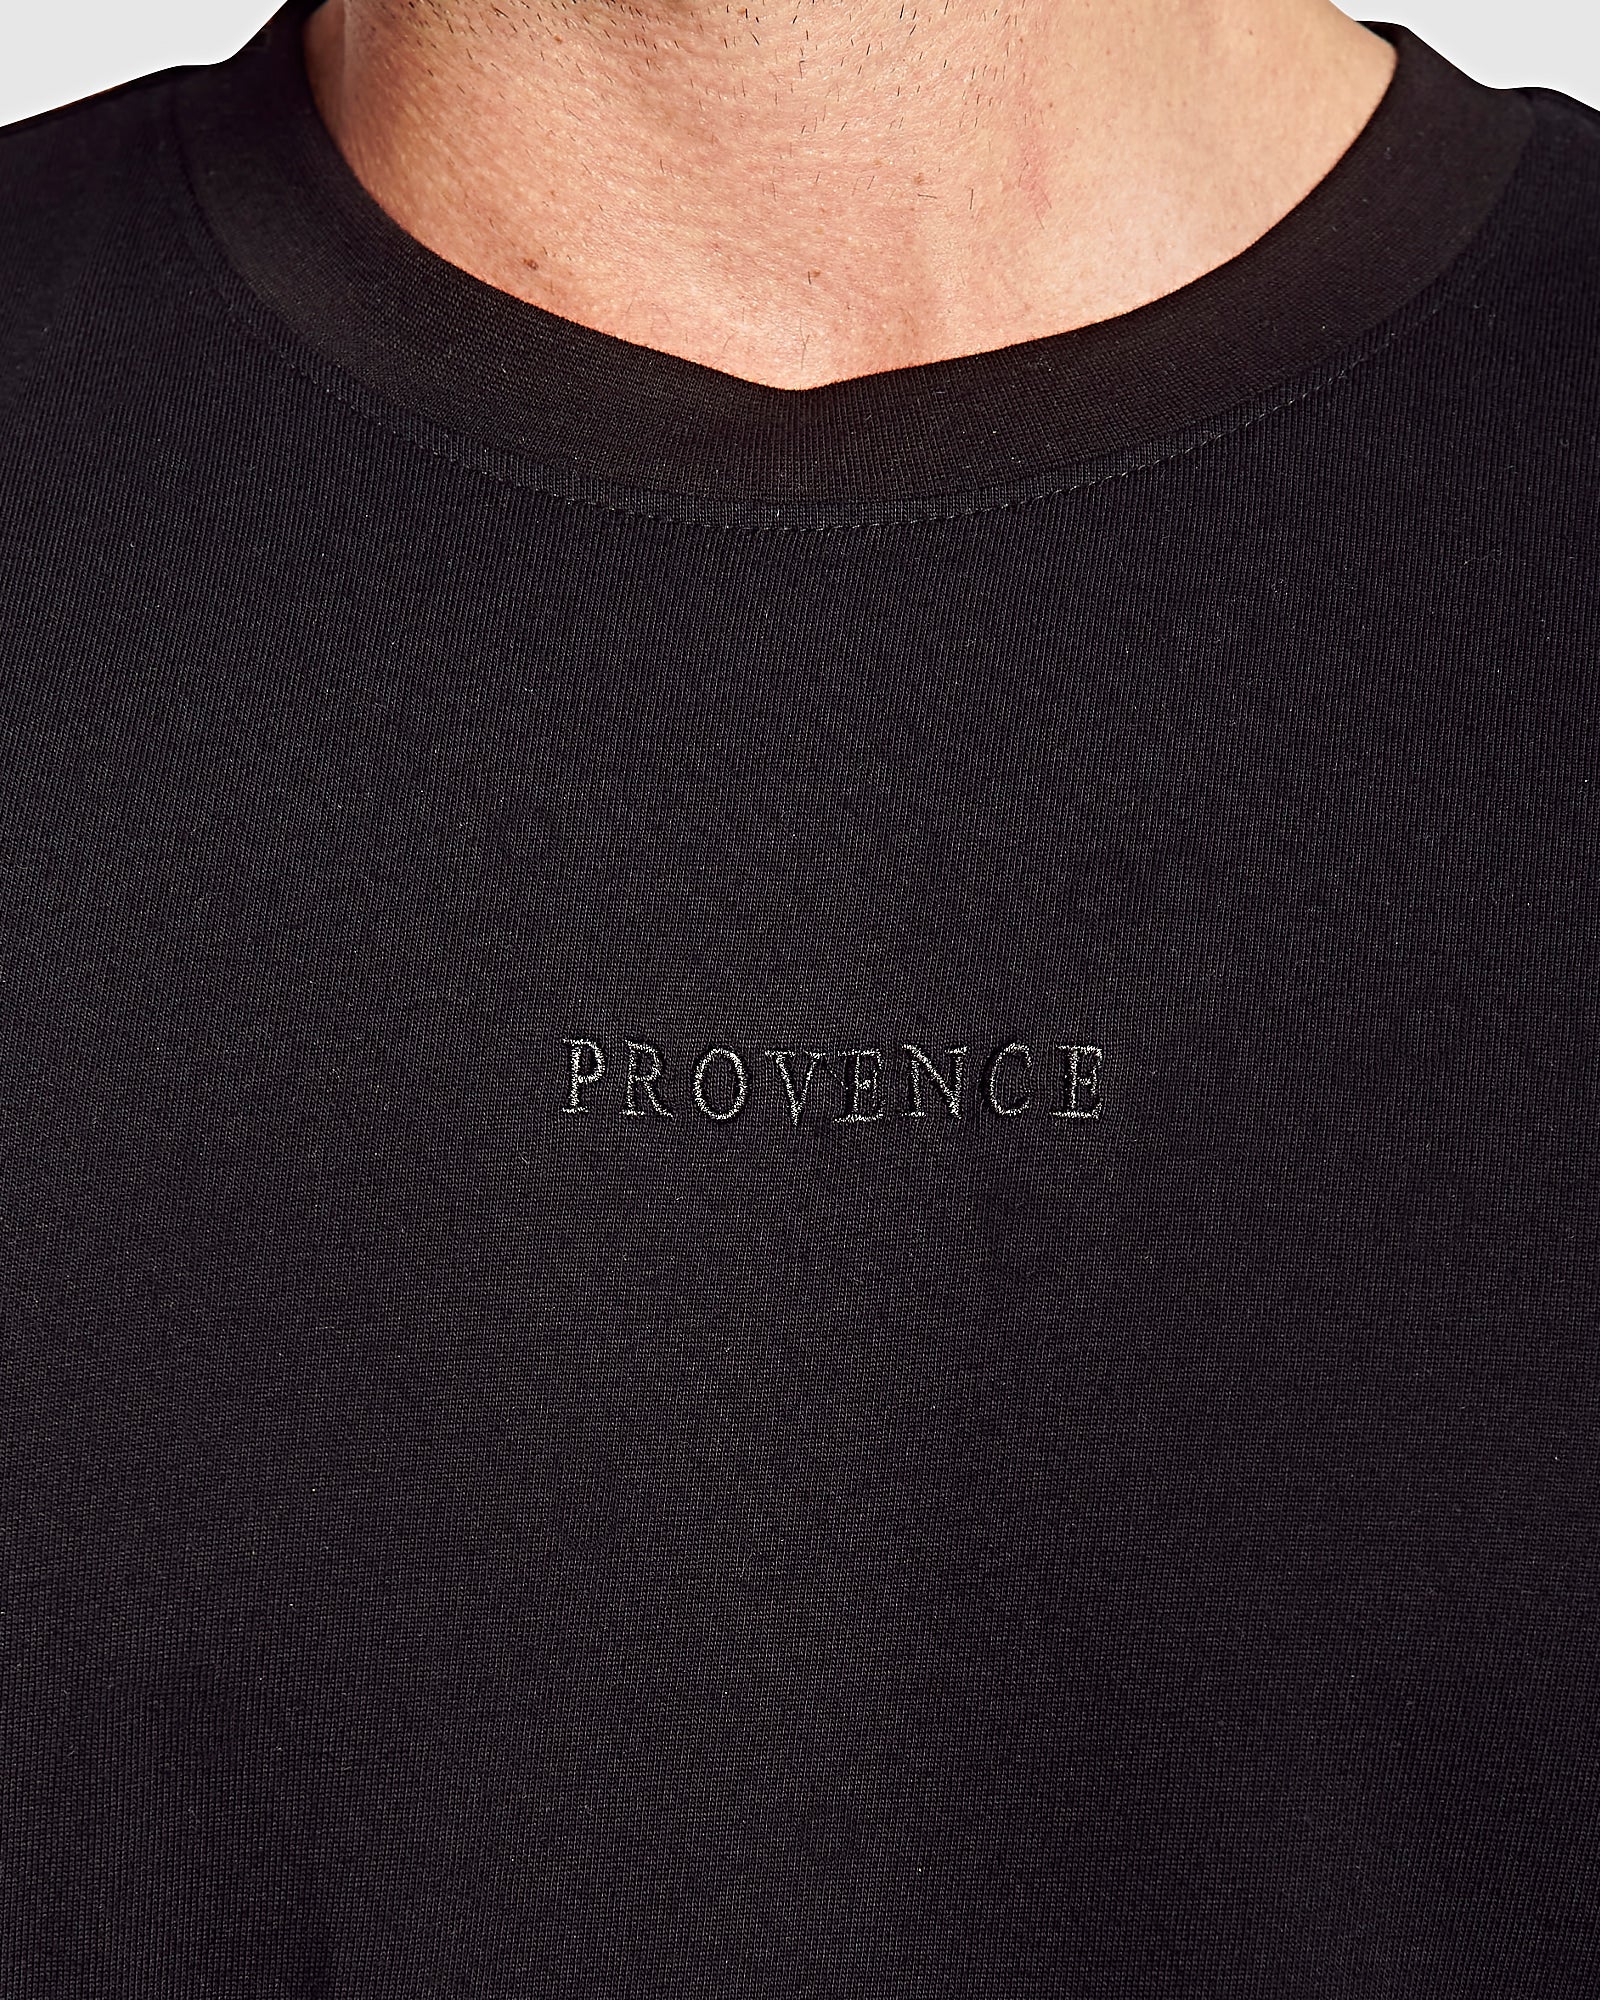 Mens Embroidery Black T-Shirt